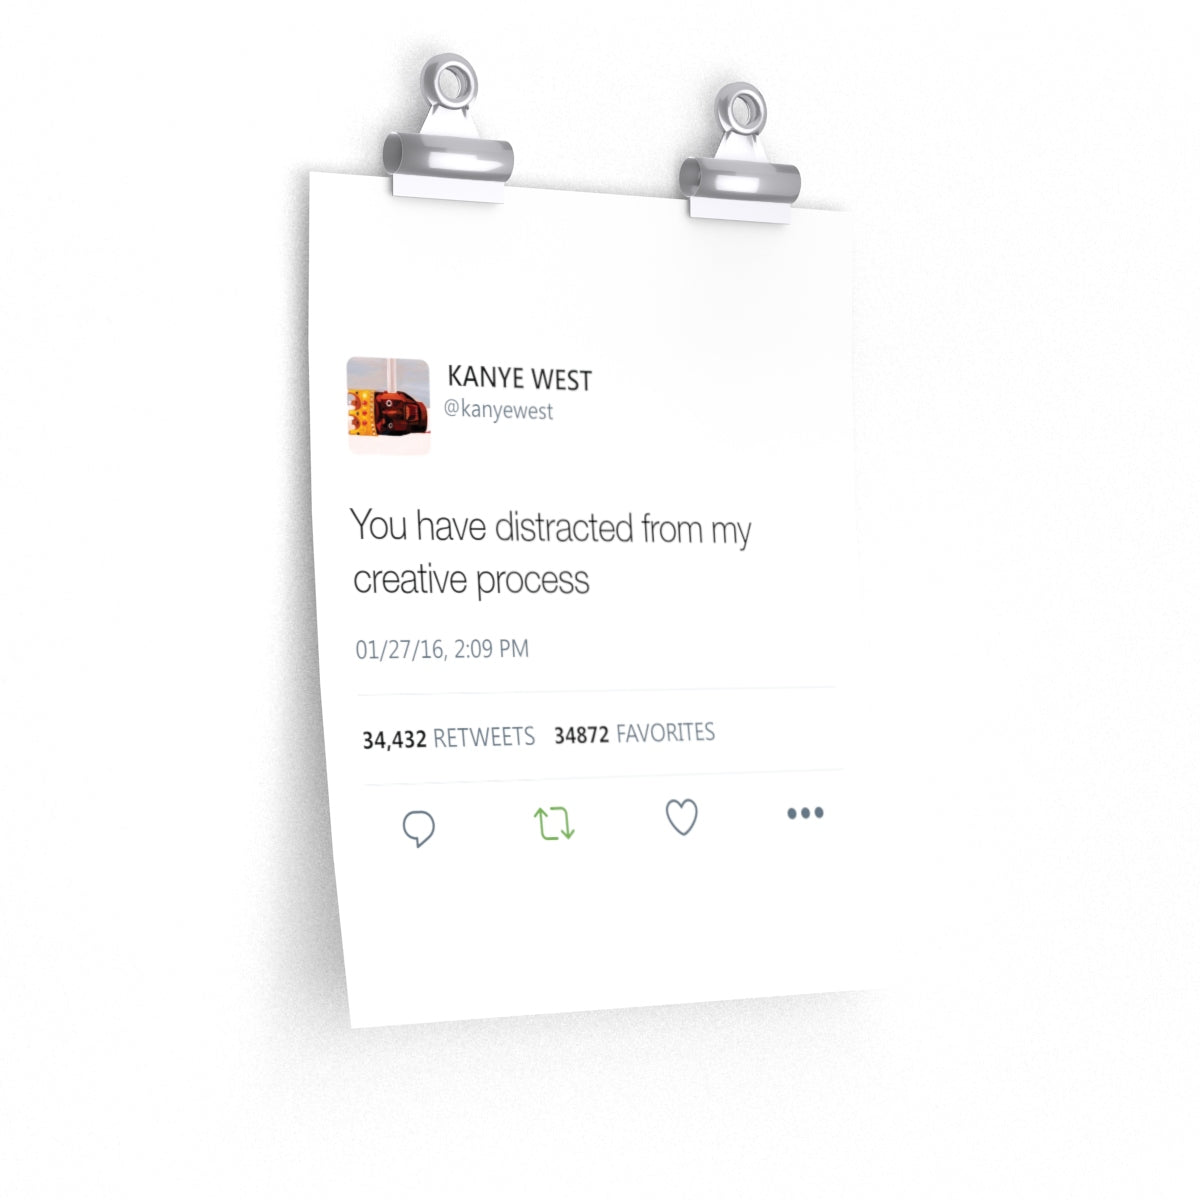 You have distracted me from my creative process - Kanye West Tweet Poster-9'' x 11''-CG Matt-Archethype